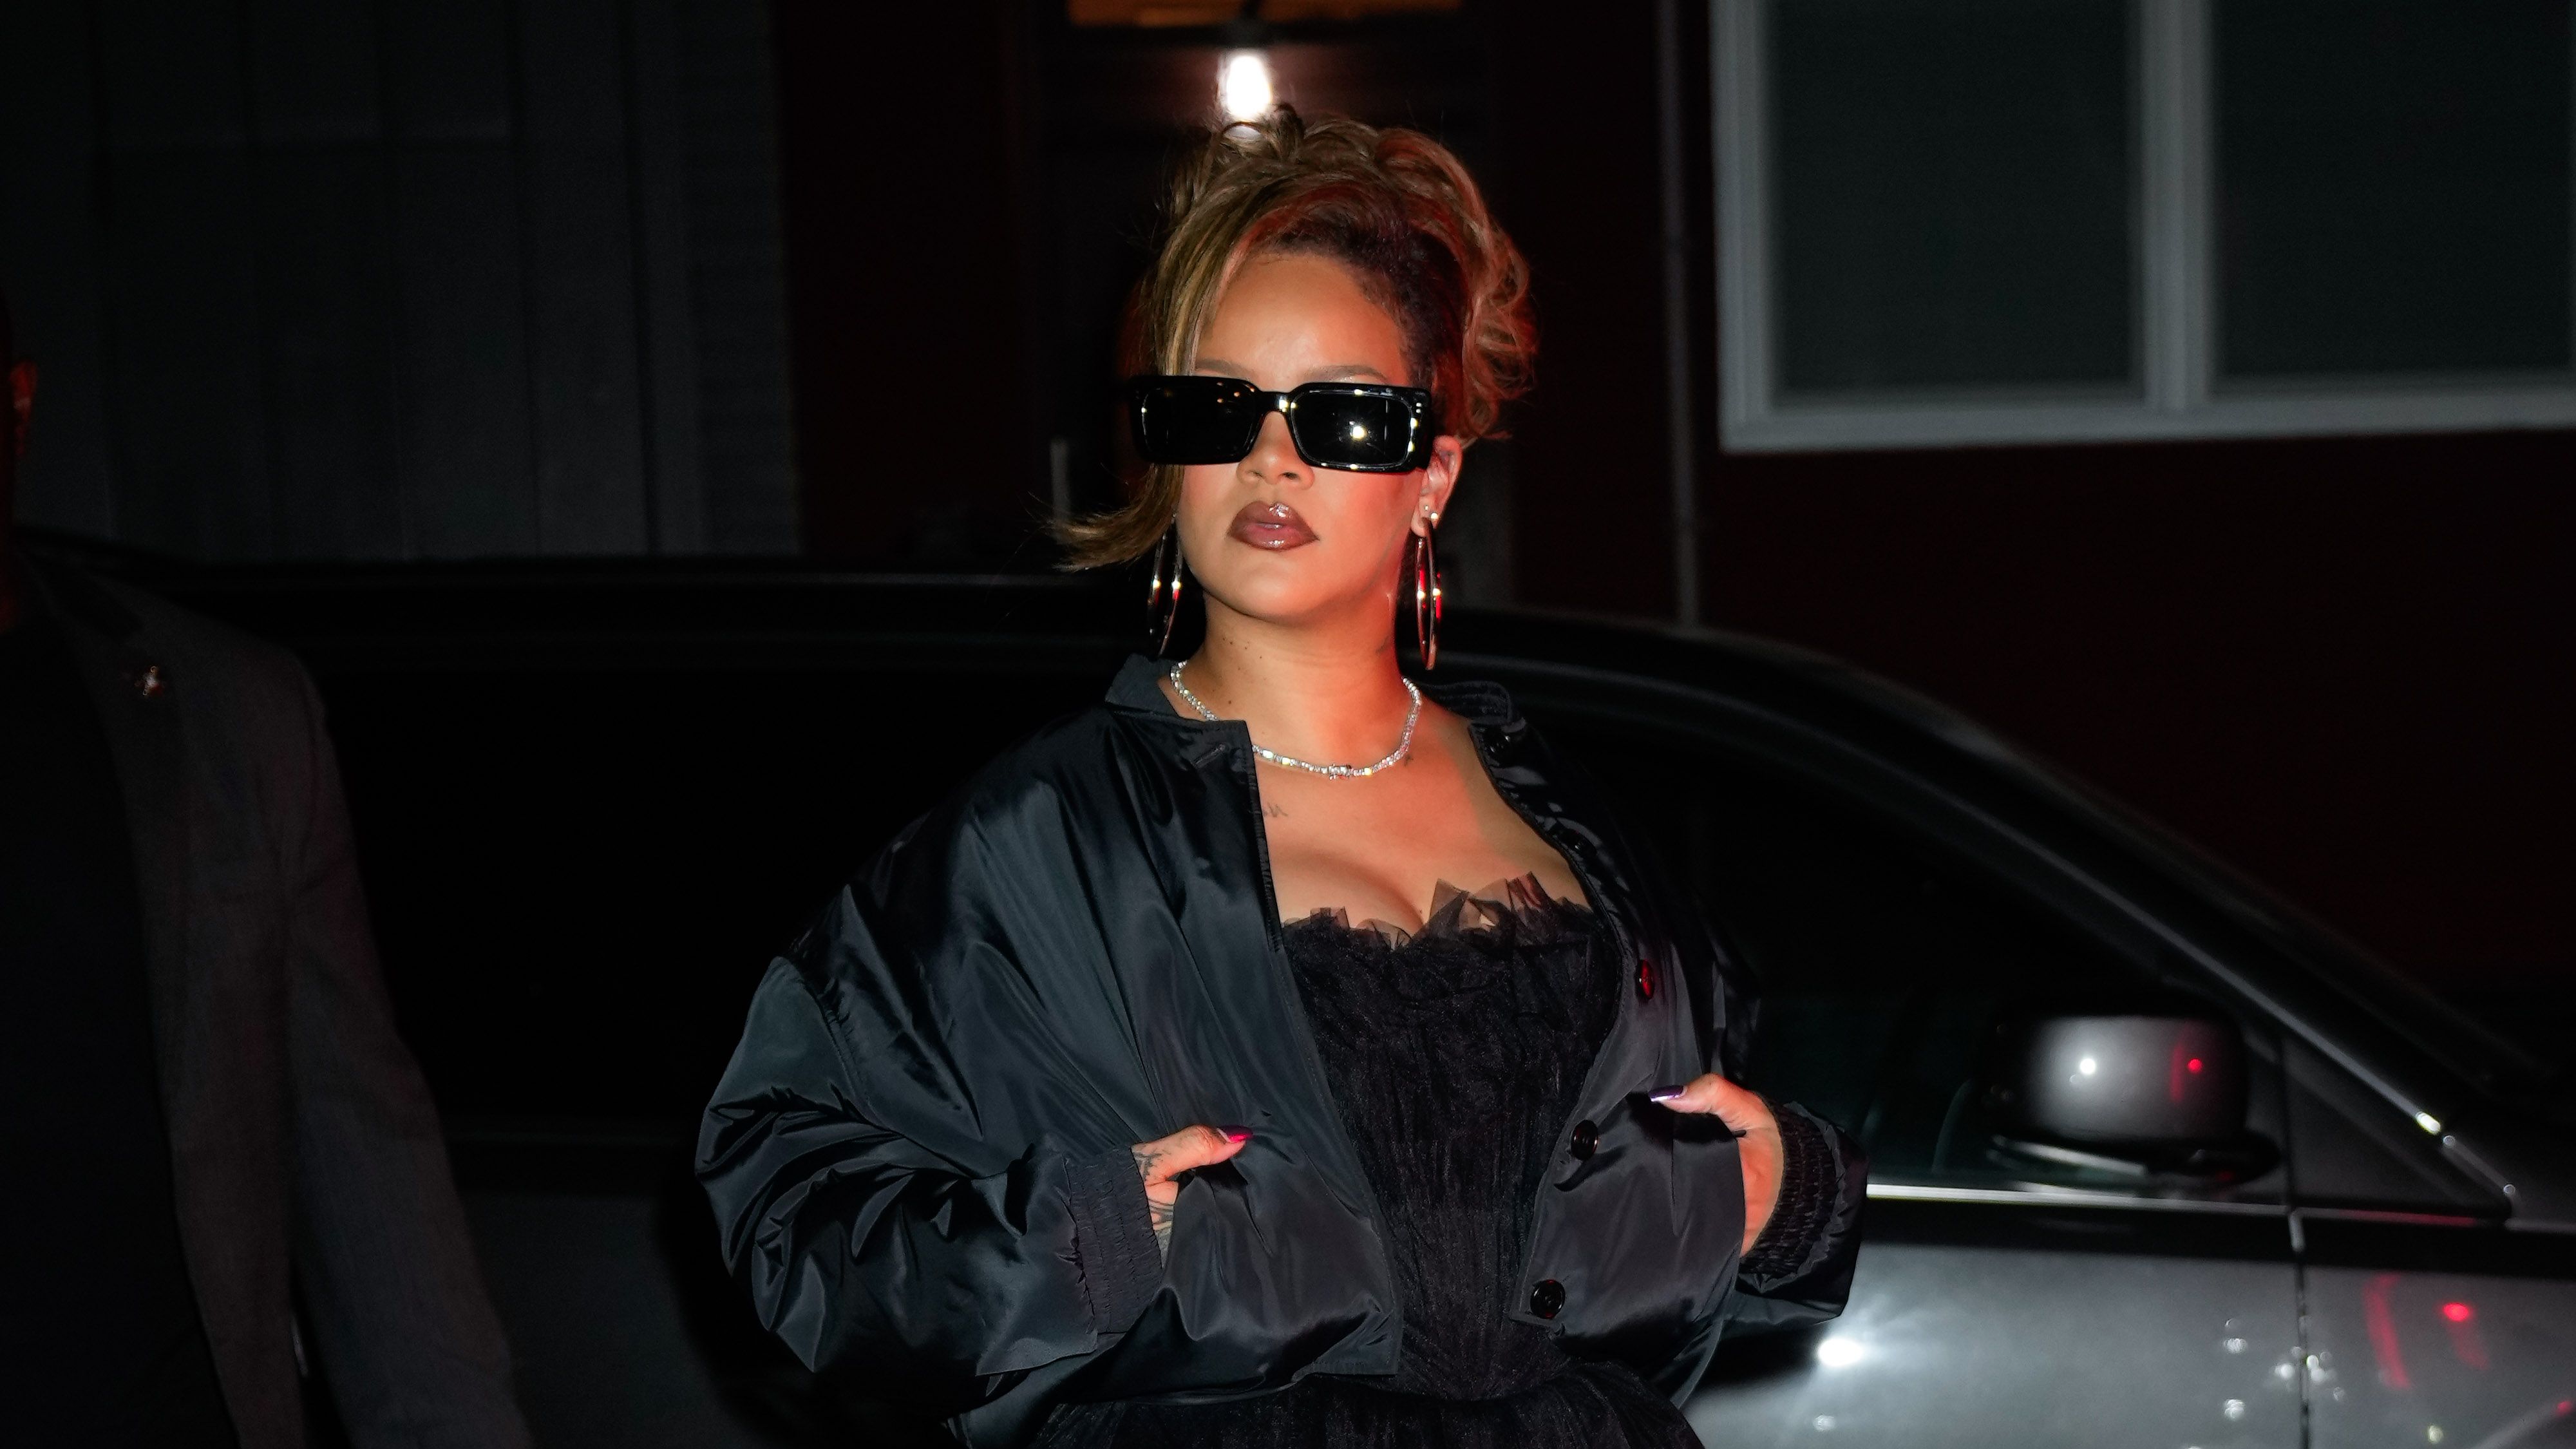 Rihanna Returns to Music: What She's Done Since Last Album